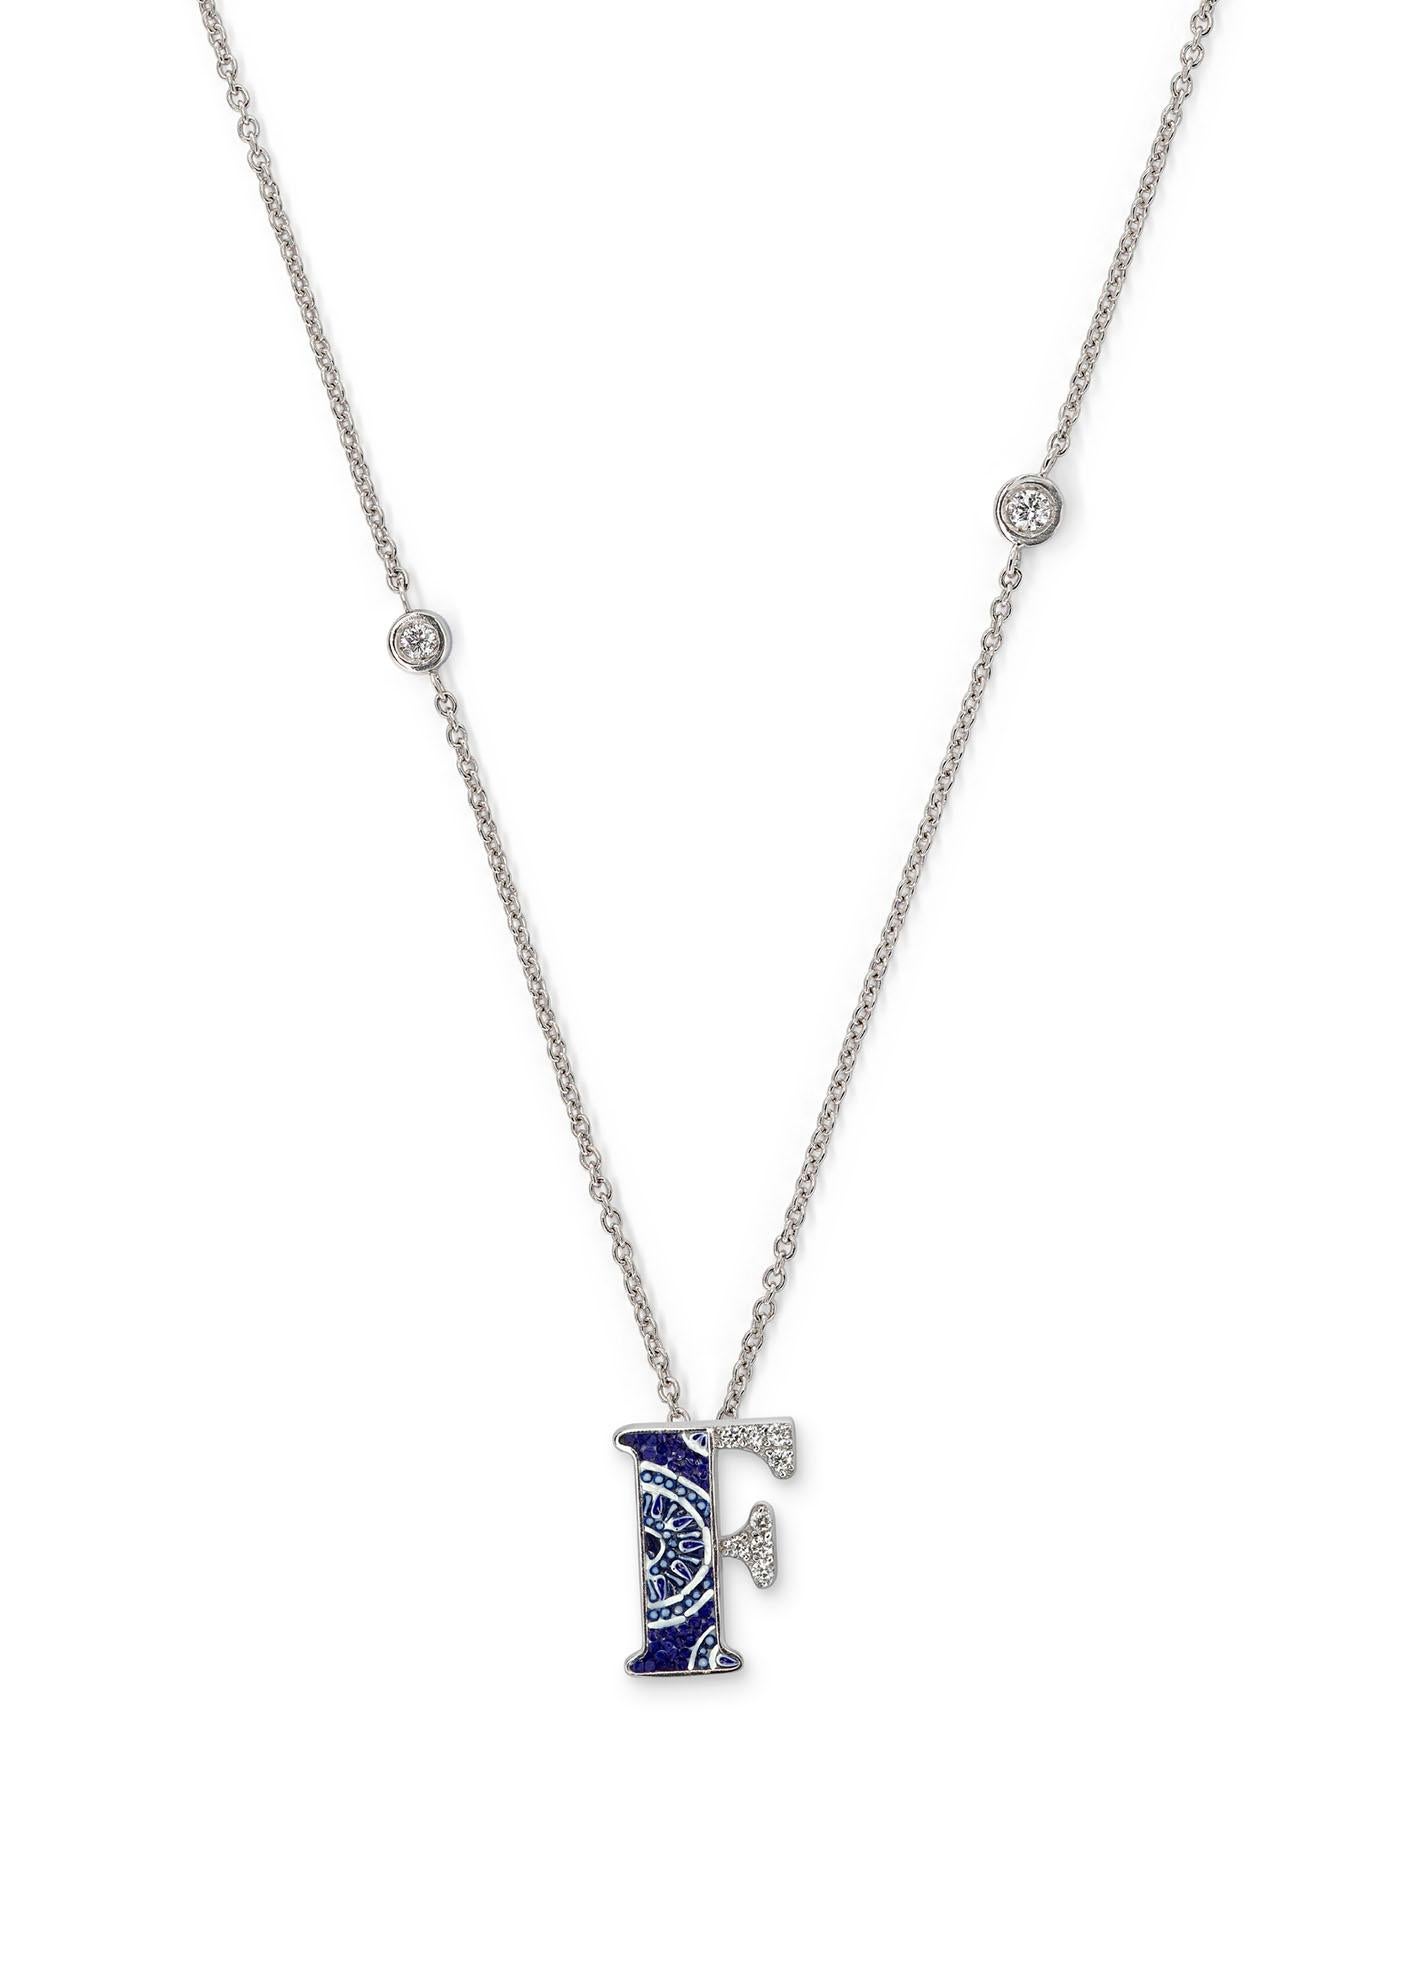 Brilliant Cut Necklace Letter F White Gold White Diamonds Hand Decorated with Micromosaic For Sale